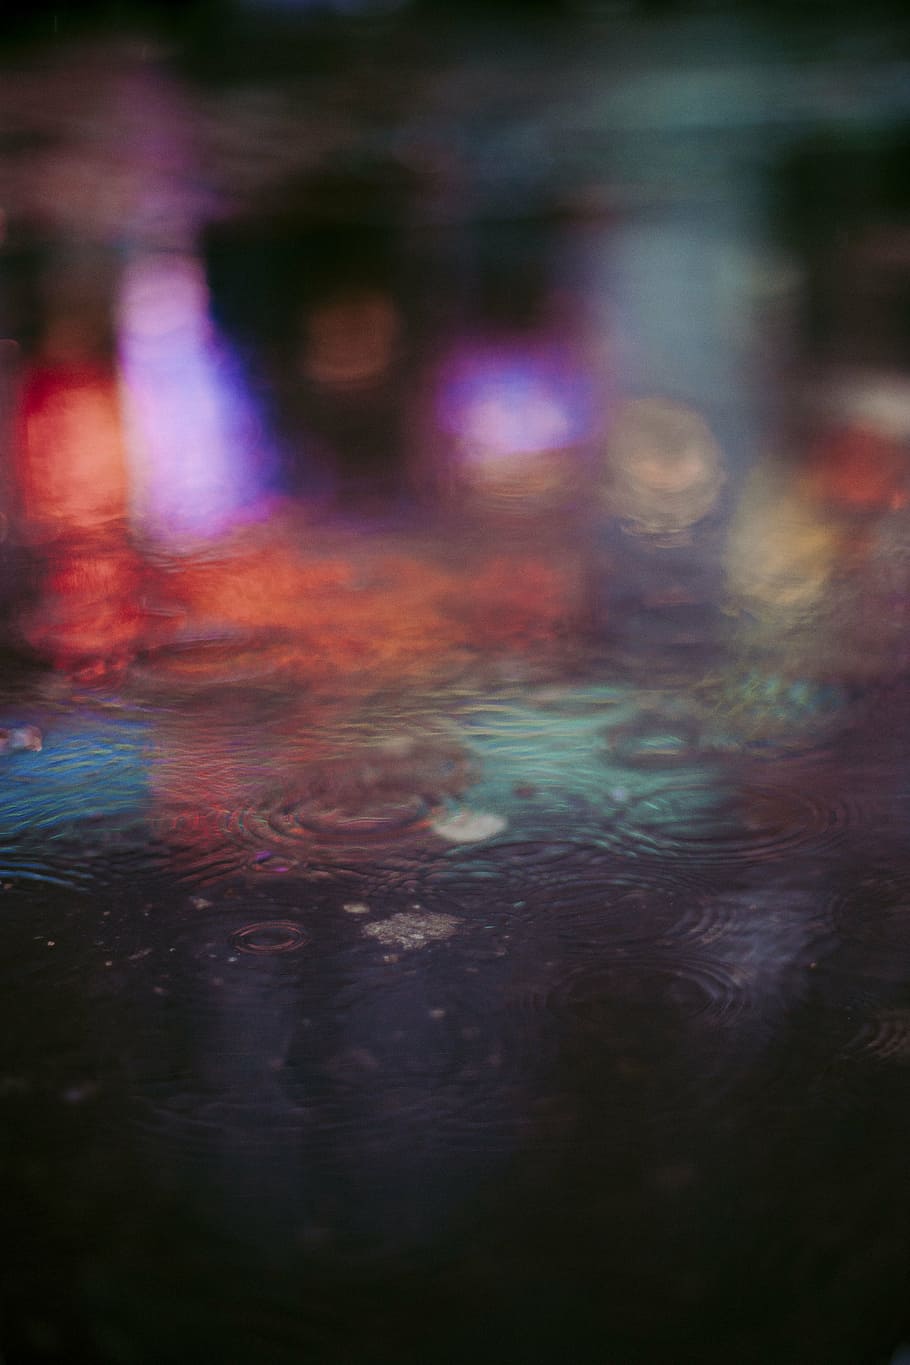 multicolored abstract painting, water, drop, rain, colorful, urban, city, backgrounds, abstract, reflection